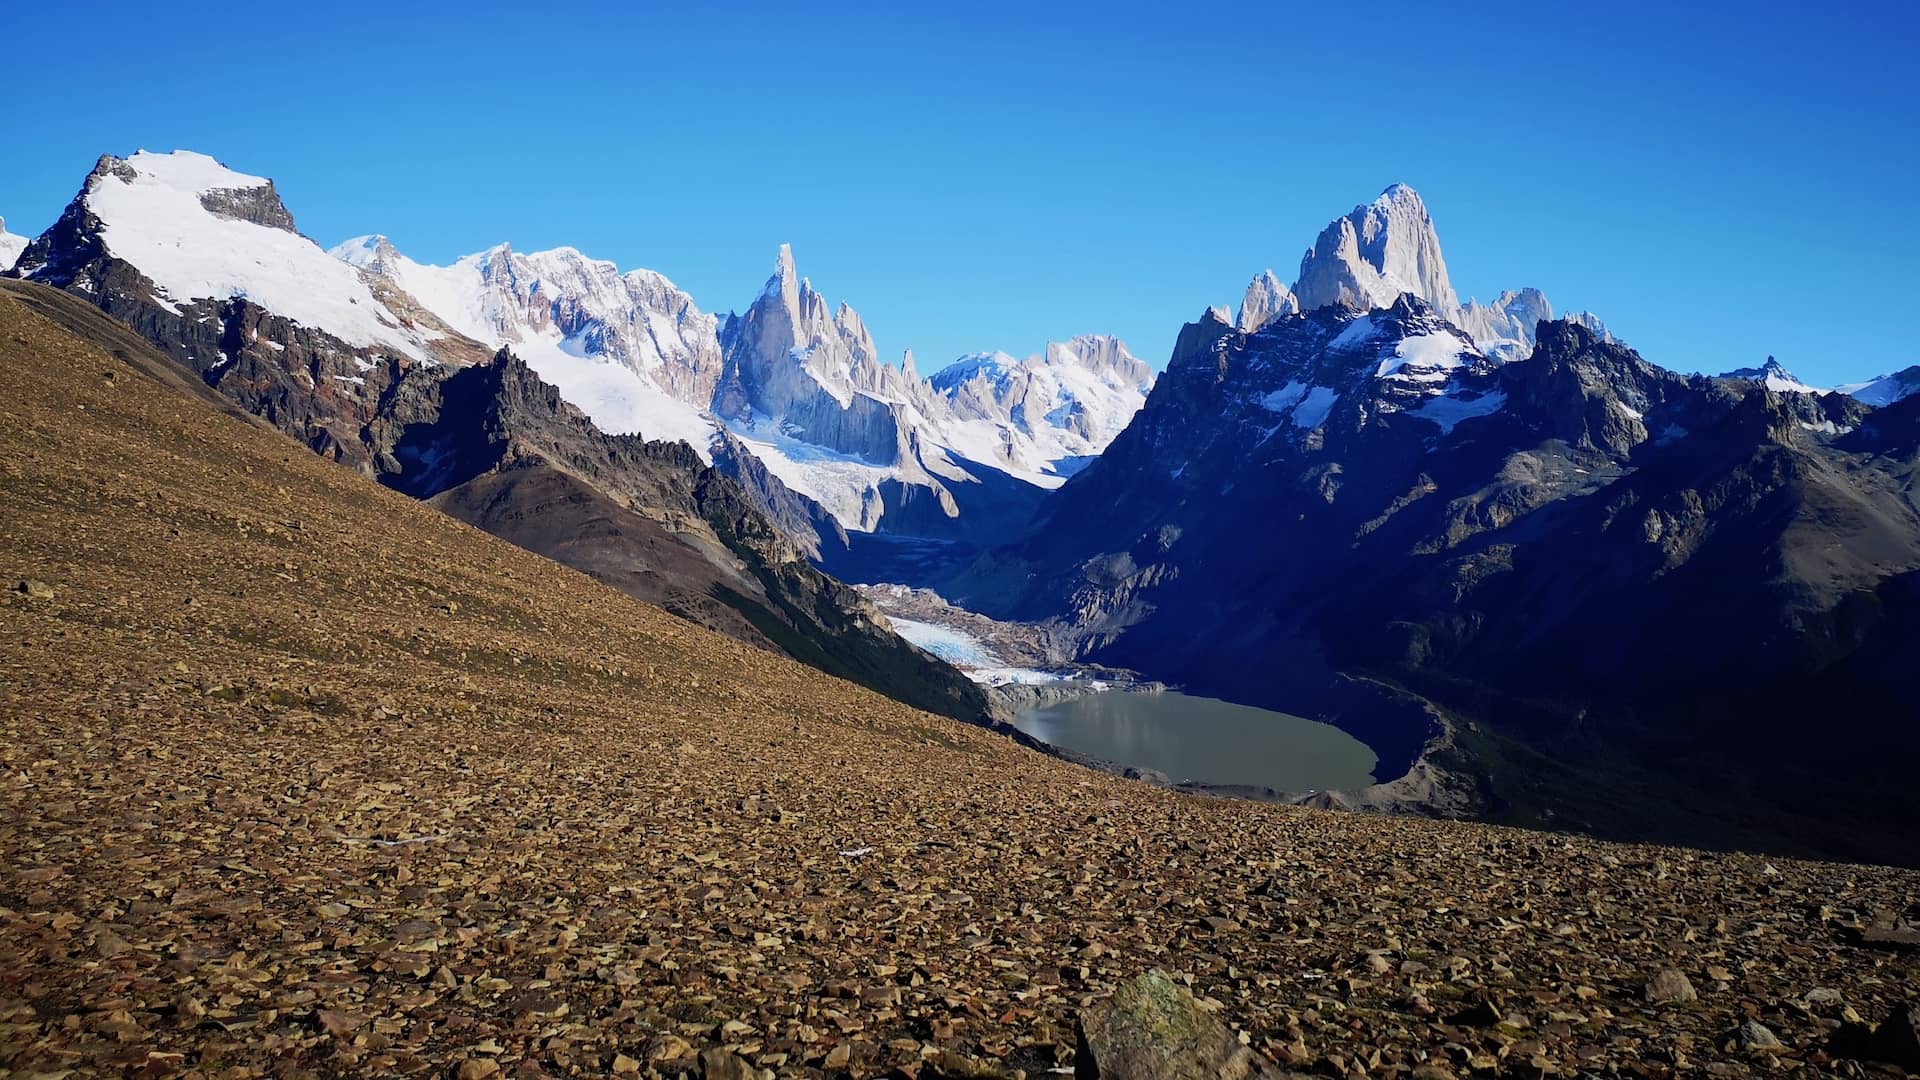 Panoramic view of both Cerro Torre and Mount Fitz Roy